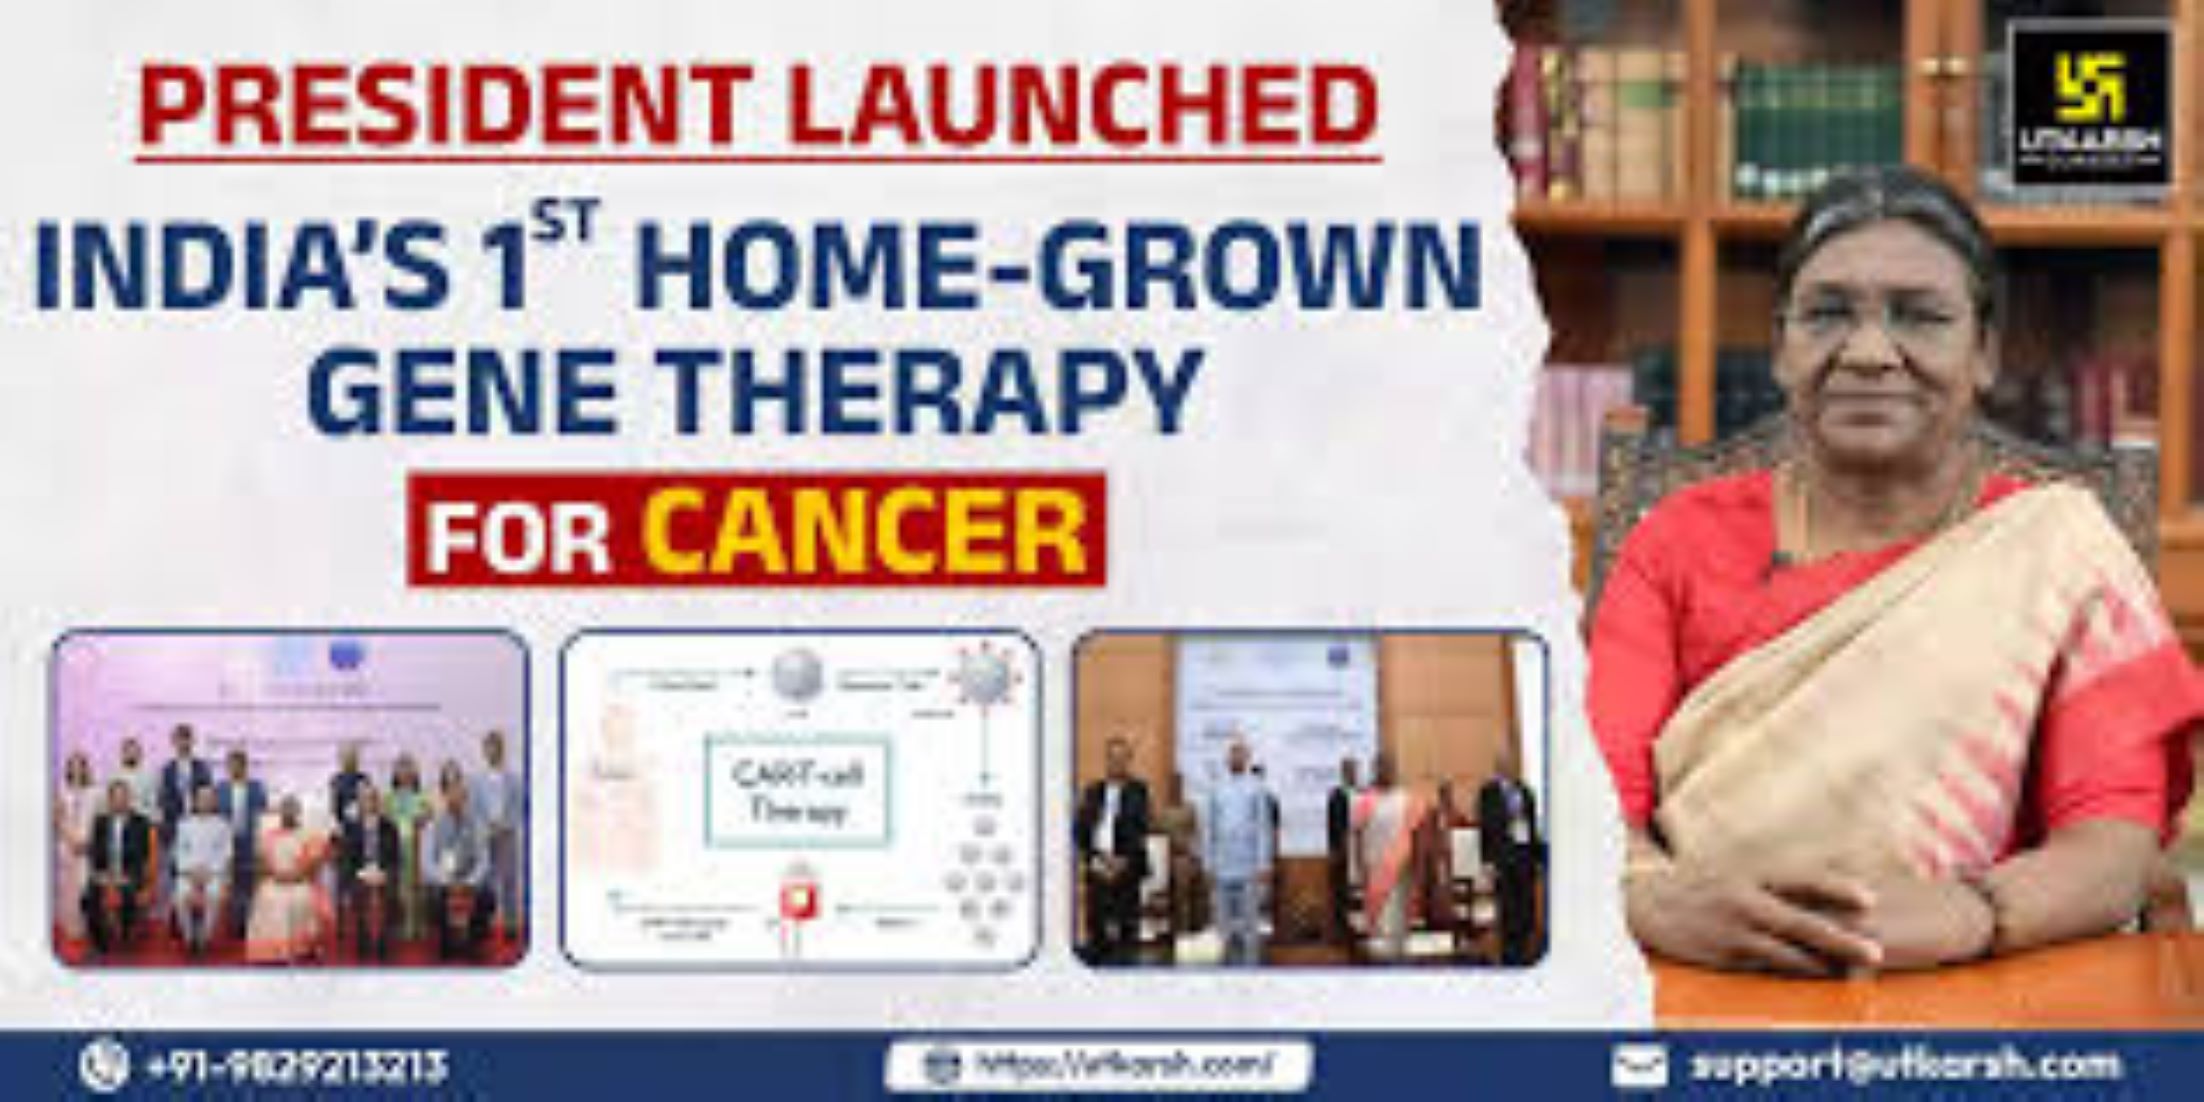 India Launched First Home-Grown Gene Therapy For Cancer